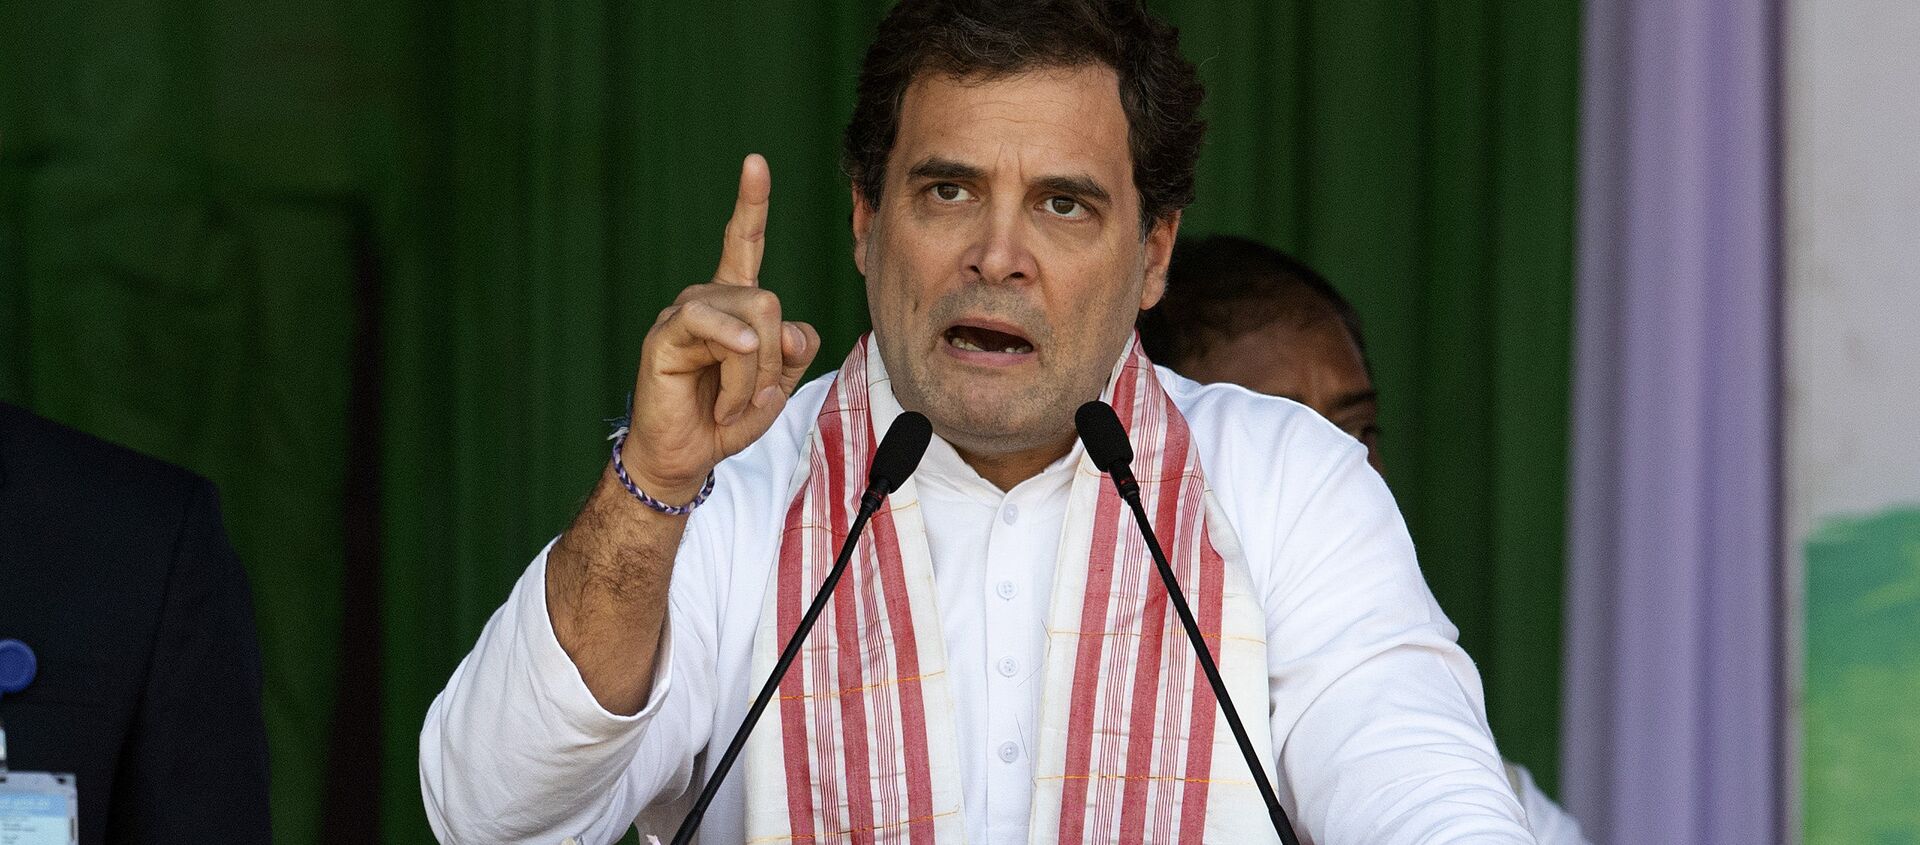 India's opposition Congress party leader Rahul Gandhi speaks at a rally against the Citizenship Amendment Act in Gauhati, India, Saturday, Dec. 28, 2019 - Sputnik International, 1920, 23.07.2021